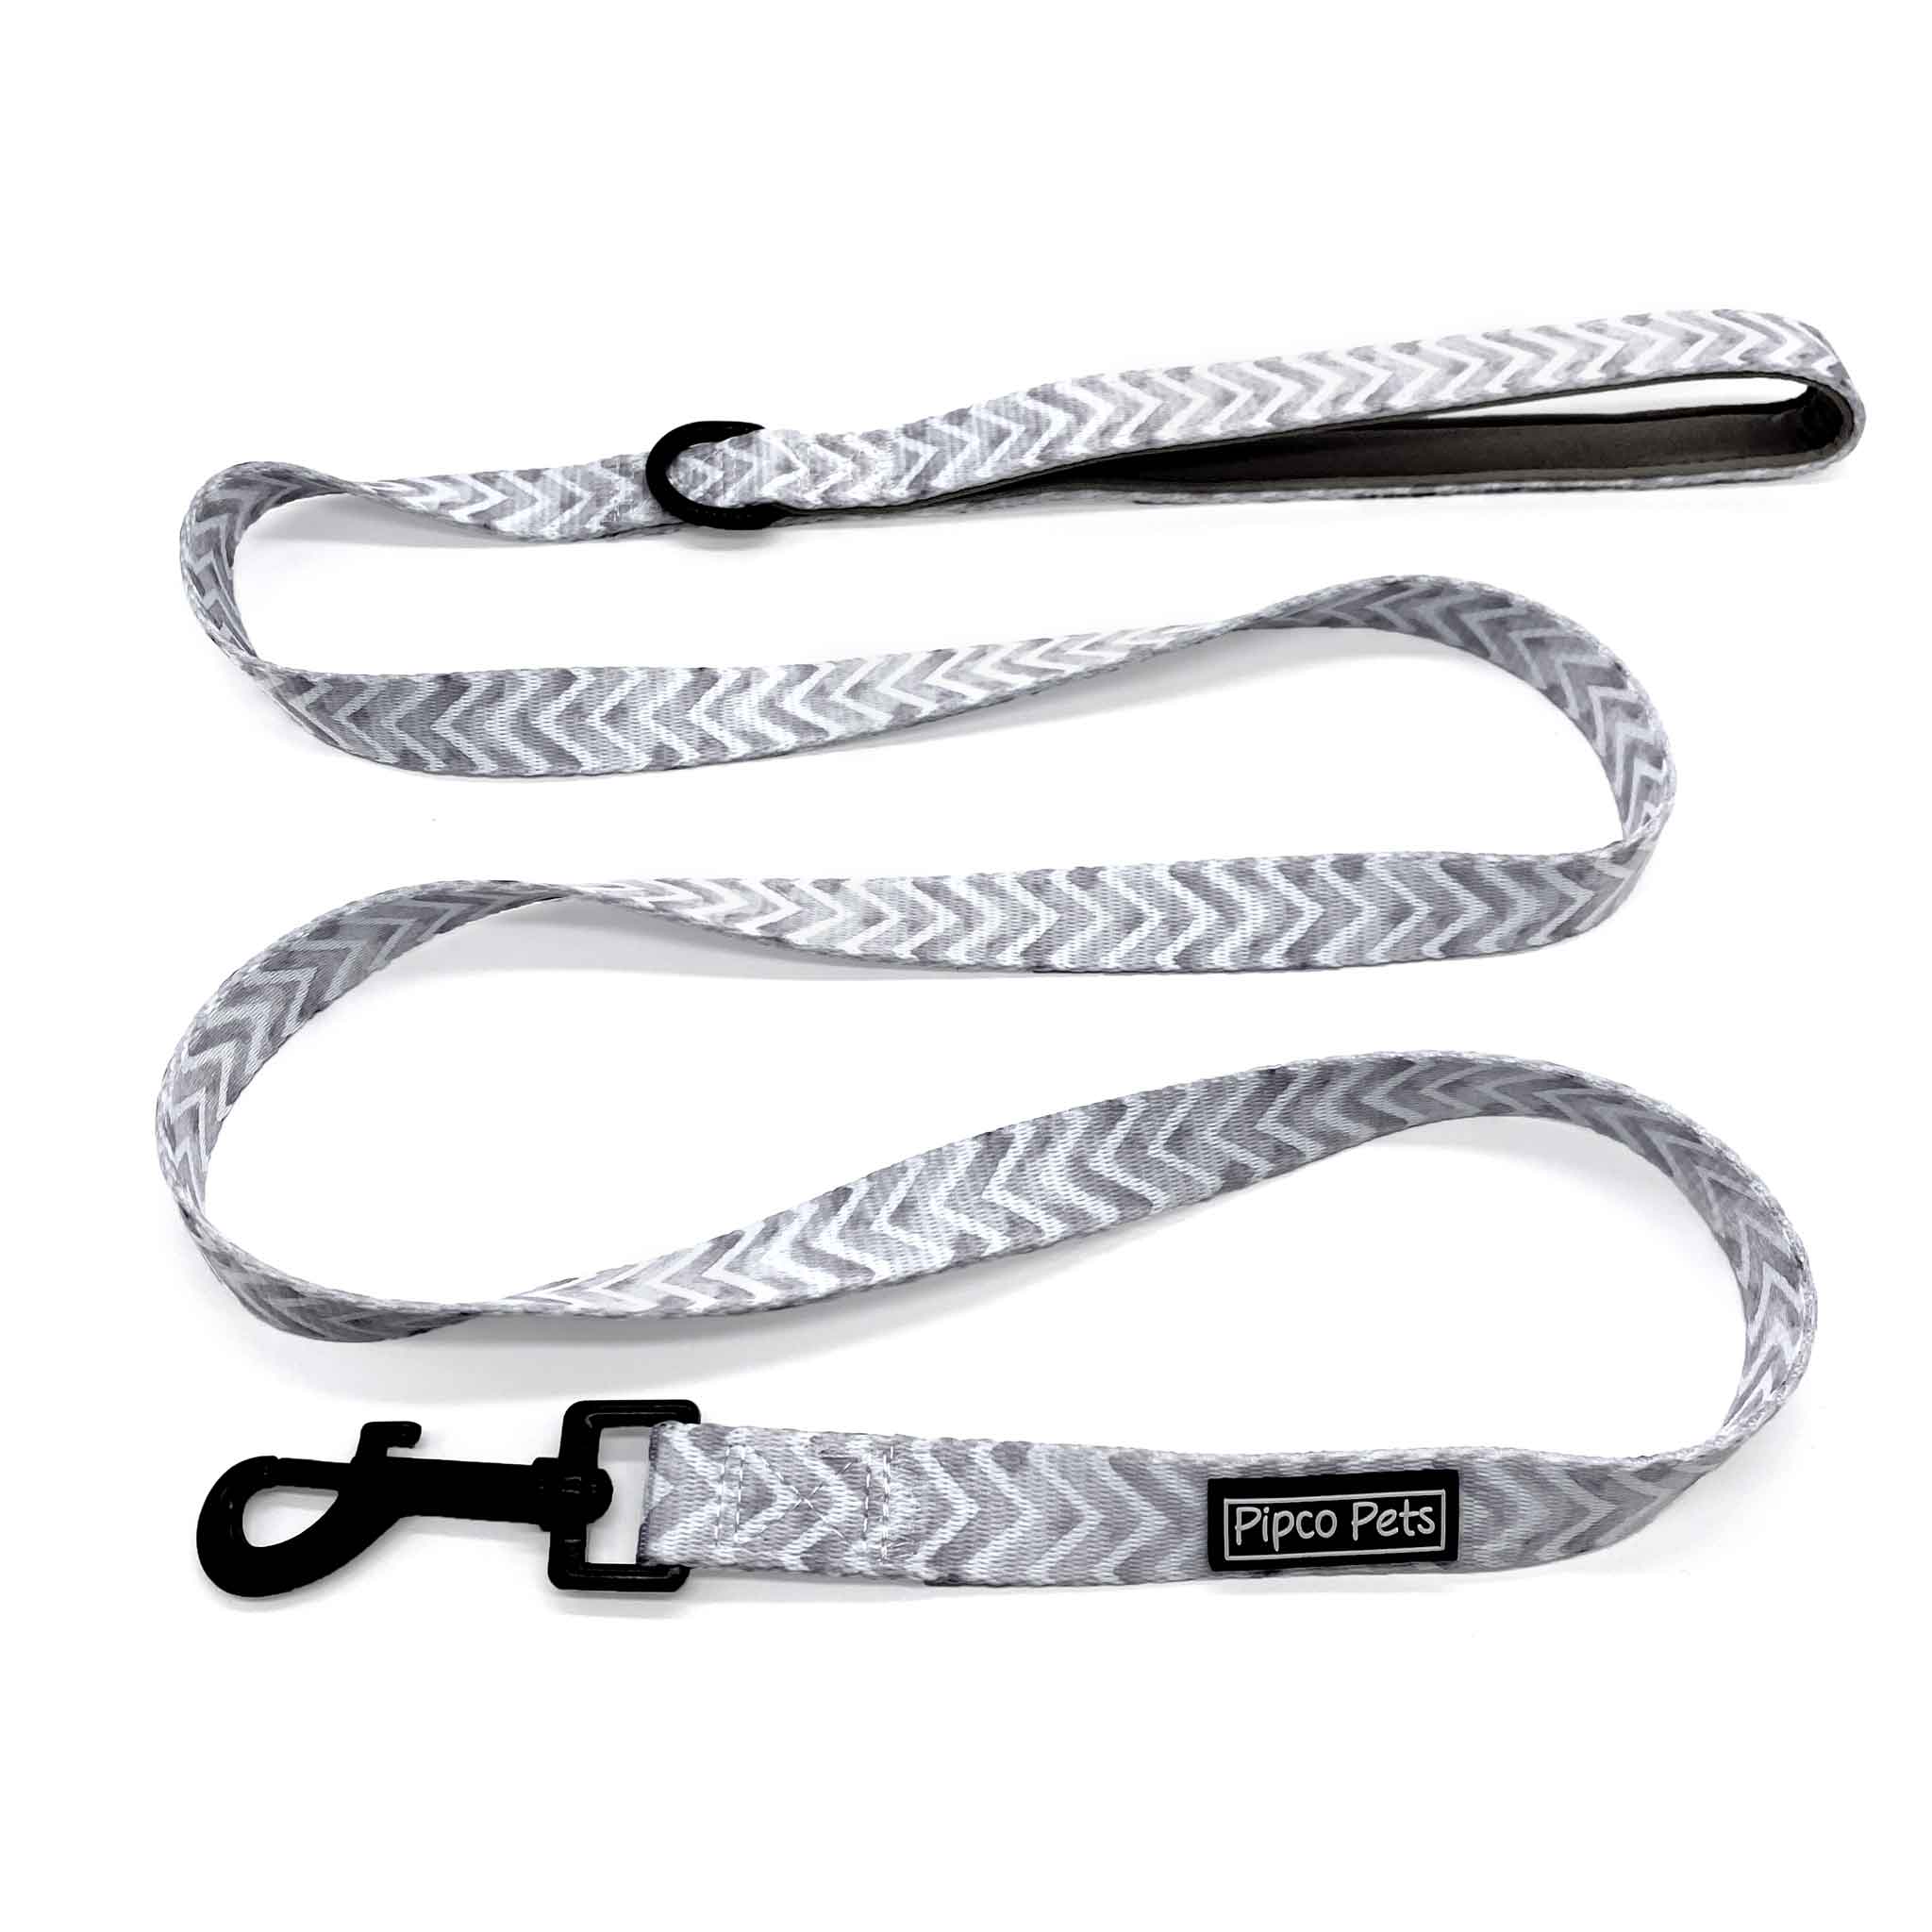 Pipco Pets dog lead with grey Zig Zags pattern